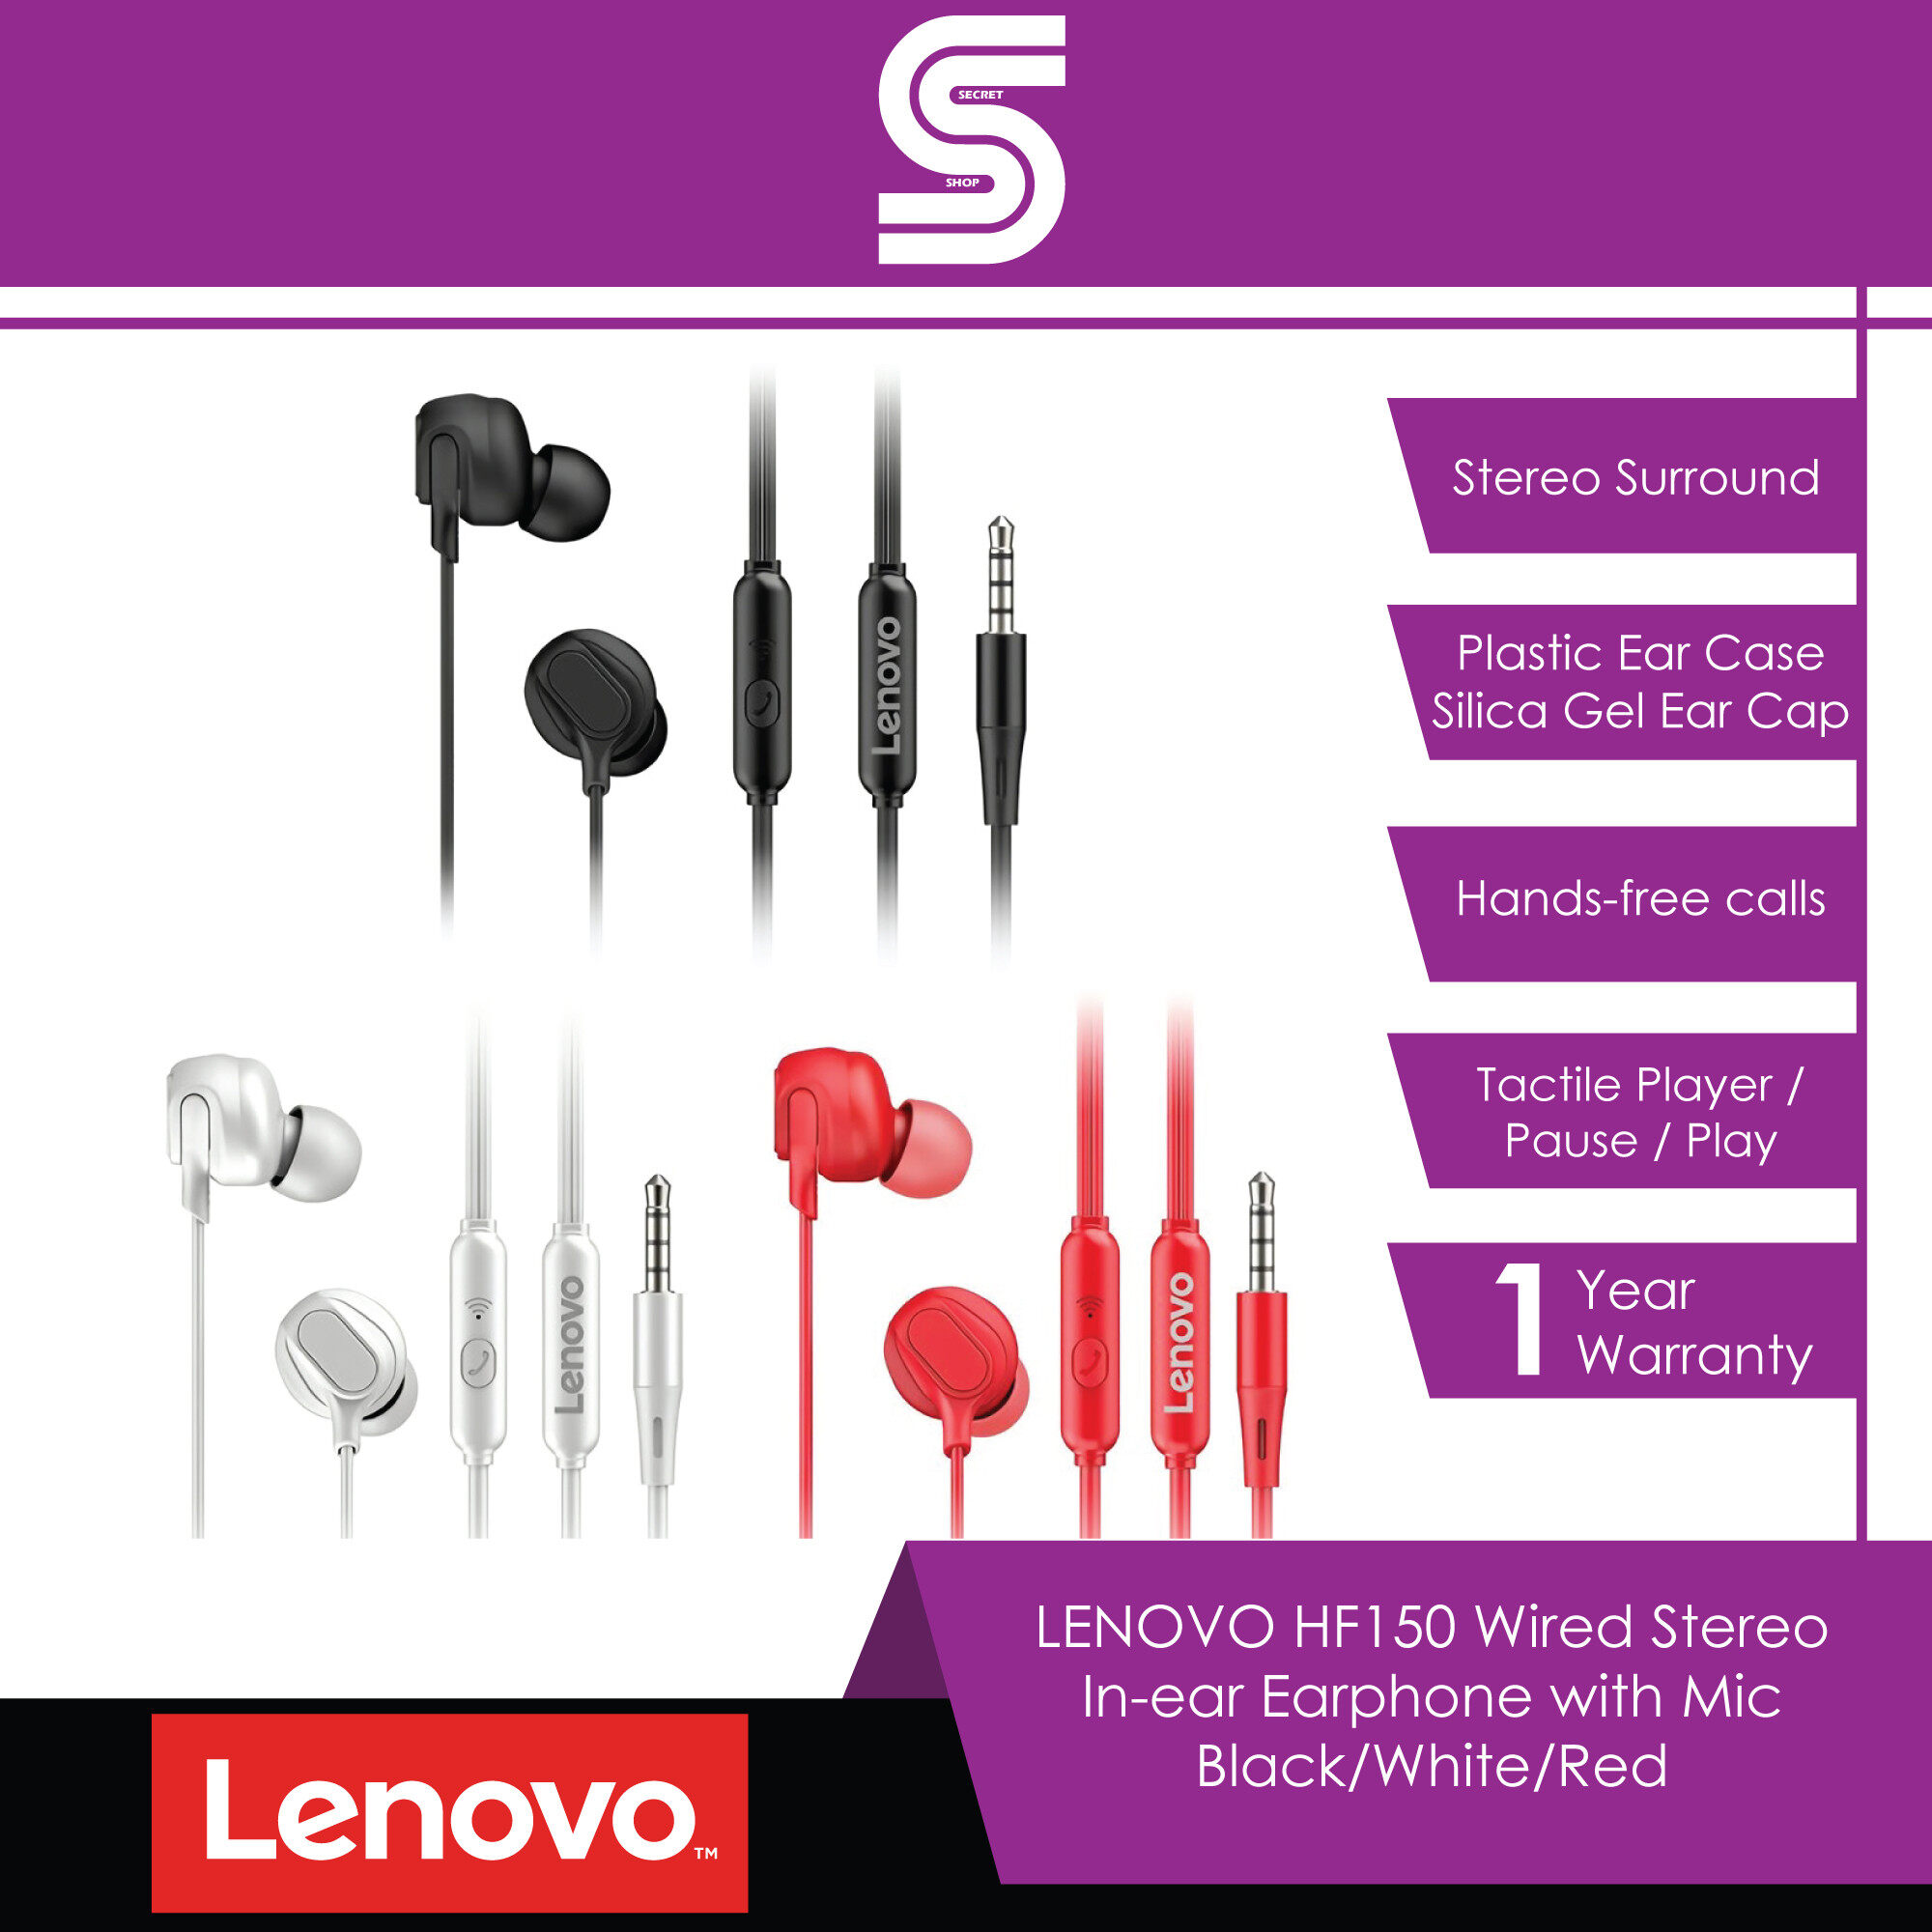 LENOVO HF150 Wired Stereo In-ear Earphone with Mic - Black/White/Red